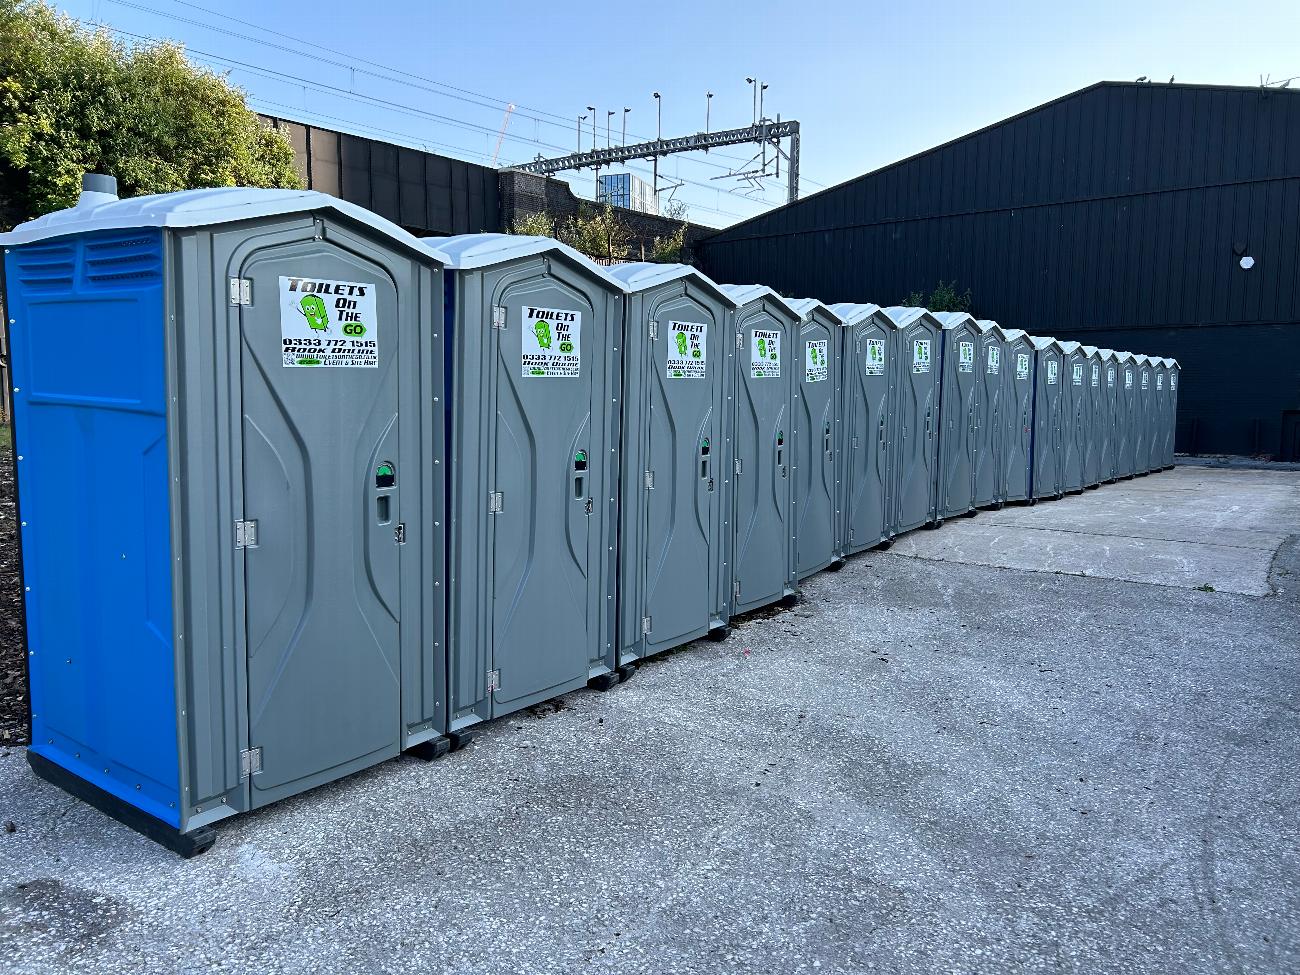 Gallery | Portable Toilet Loo Hire Rental Company in North West uk and Manchester gallery image 48